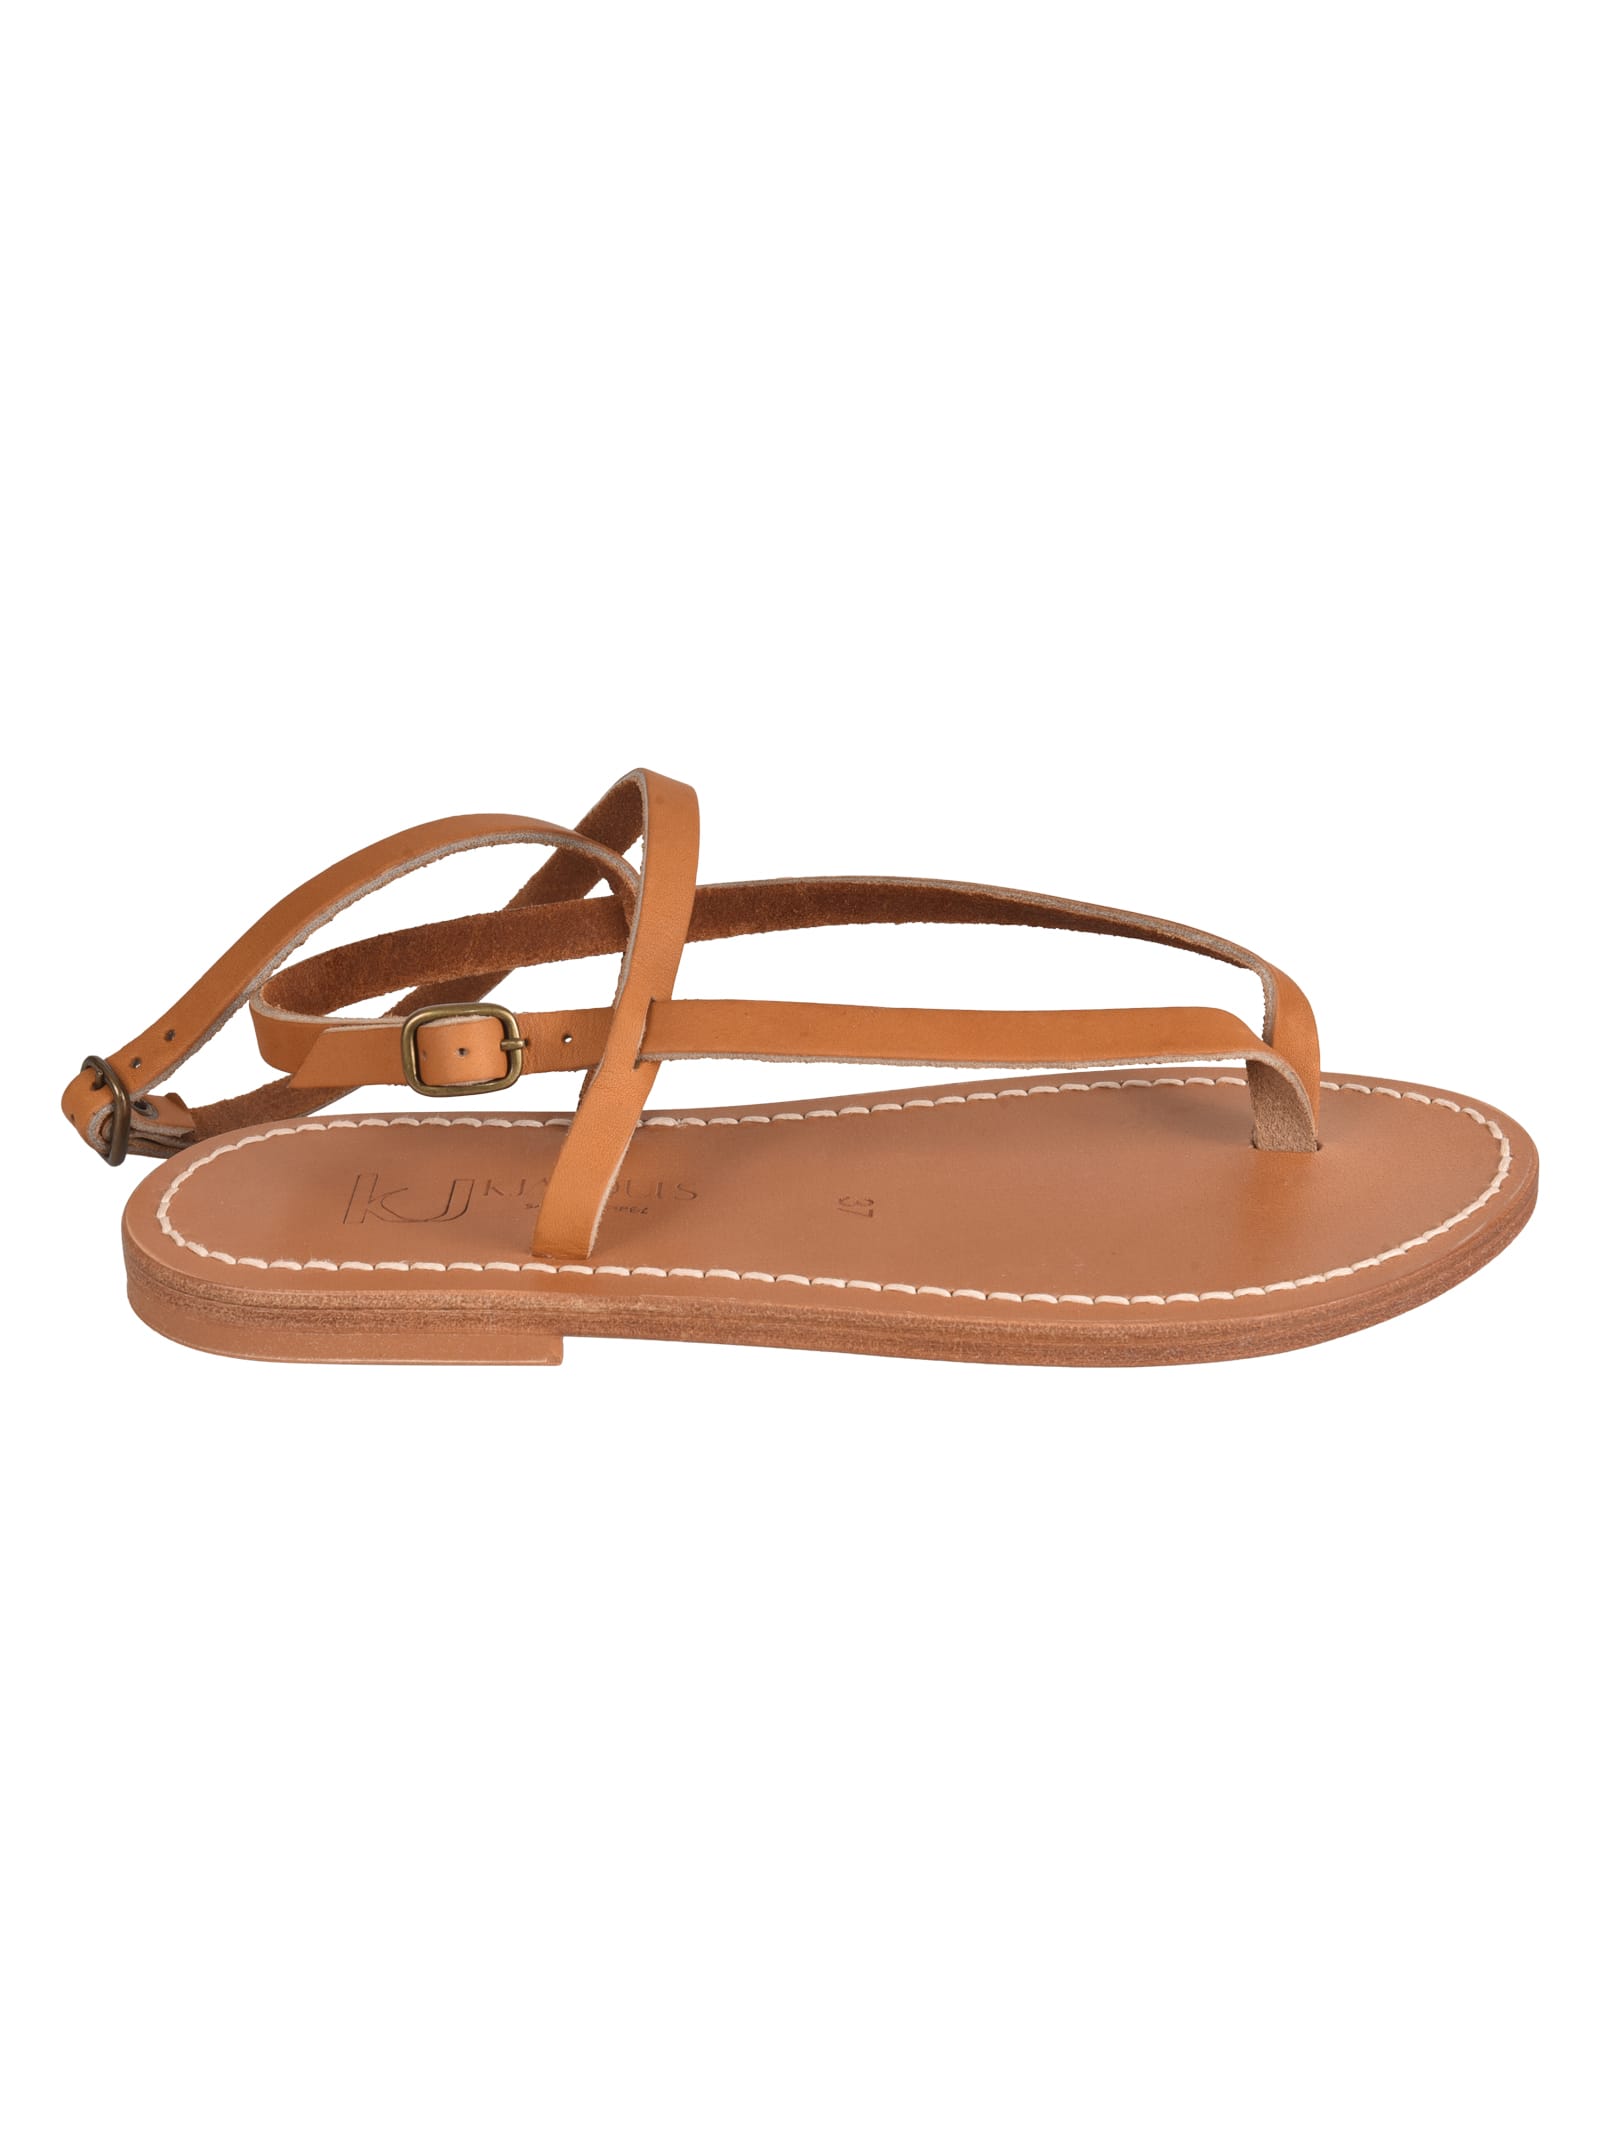 K.jacques ABAKO SANDALS